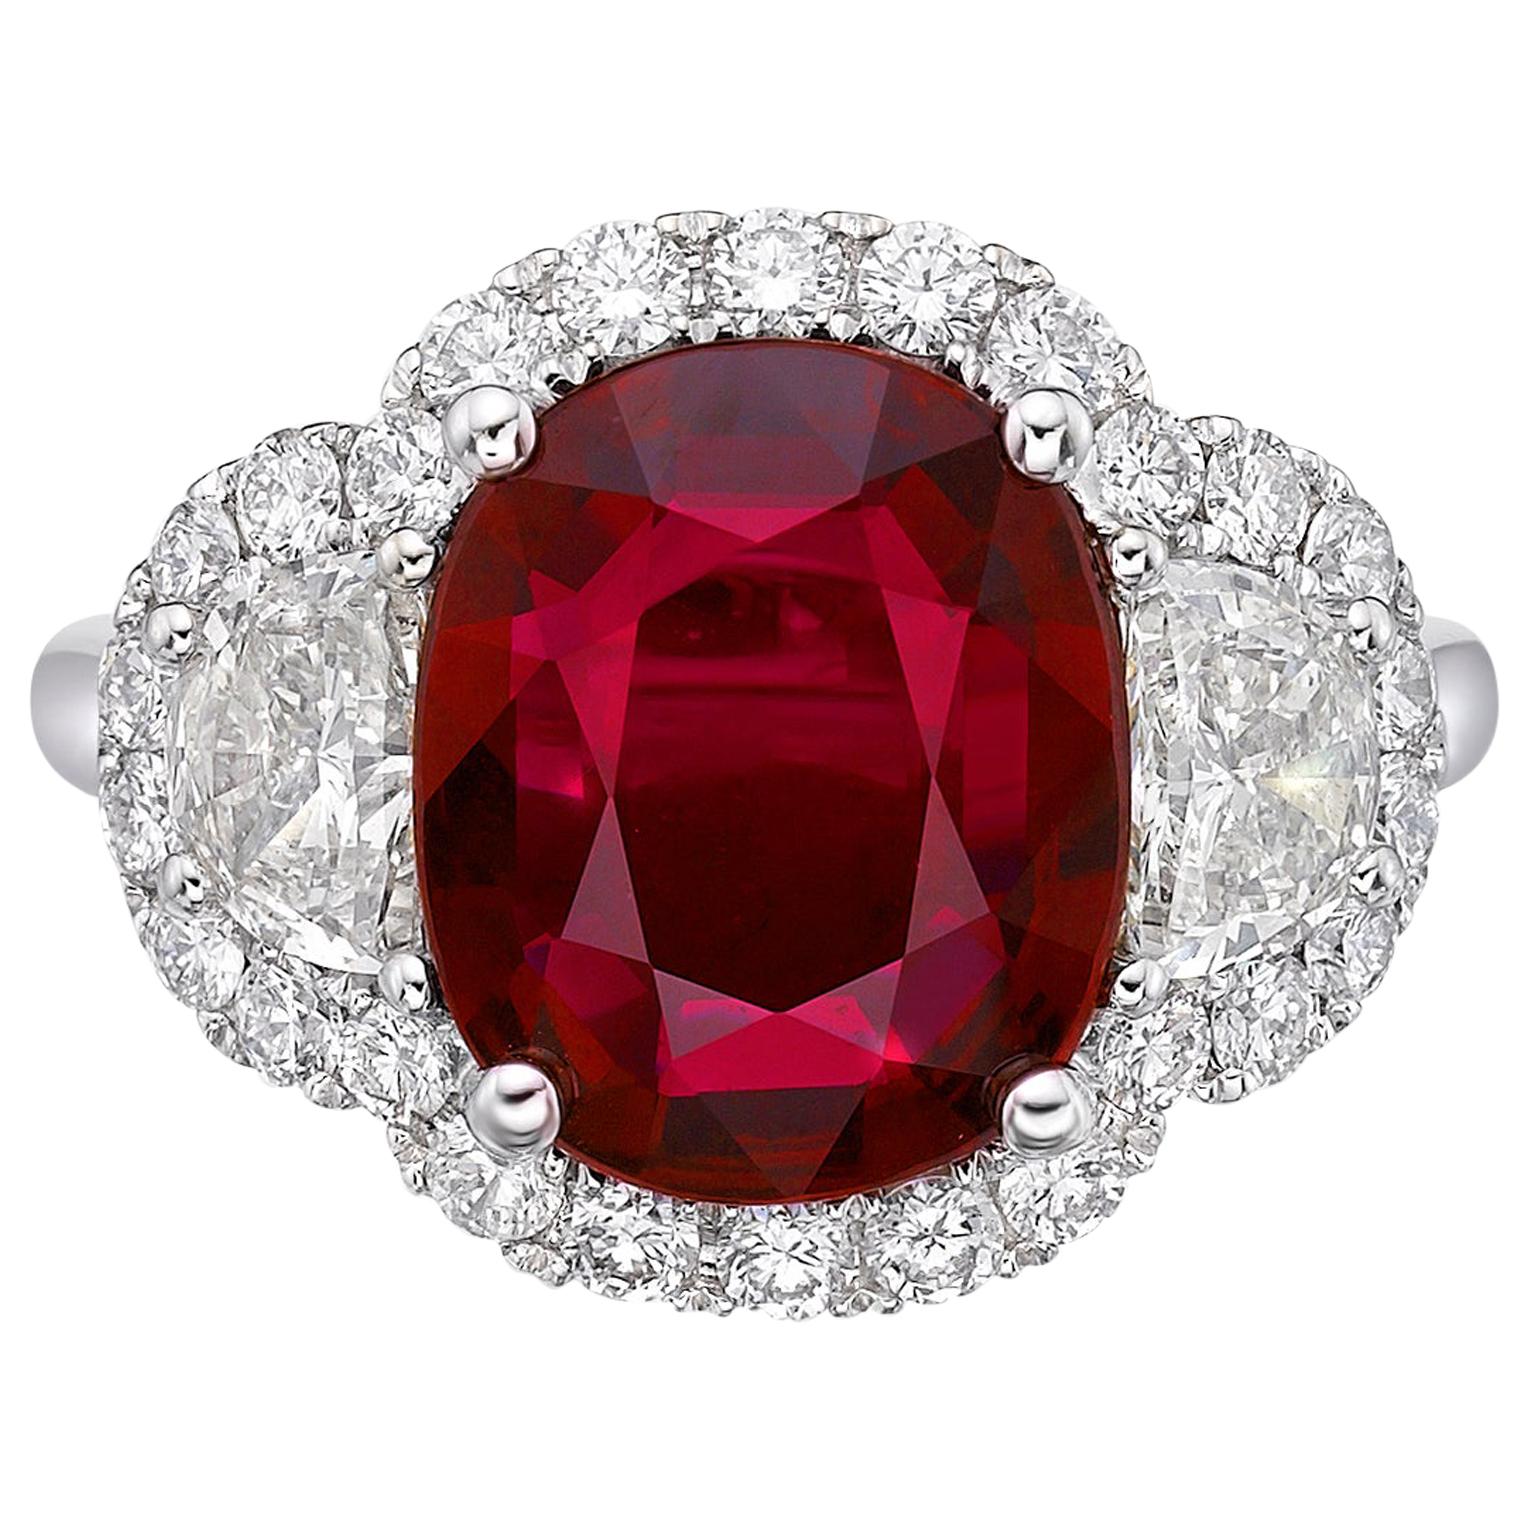 4.14 Carat Vivid Red Ruby GRS Certified Diamond Ring Oval Cut 